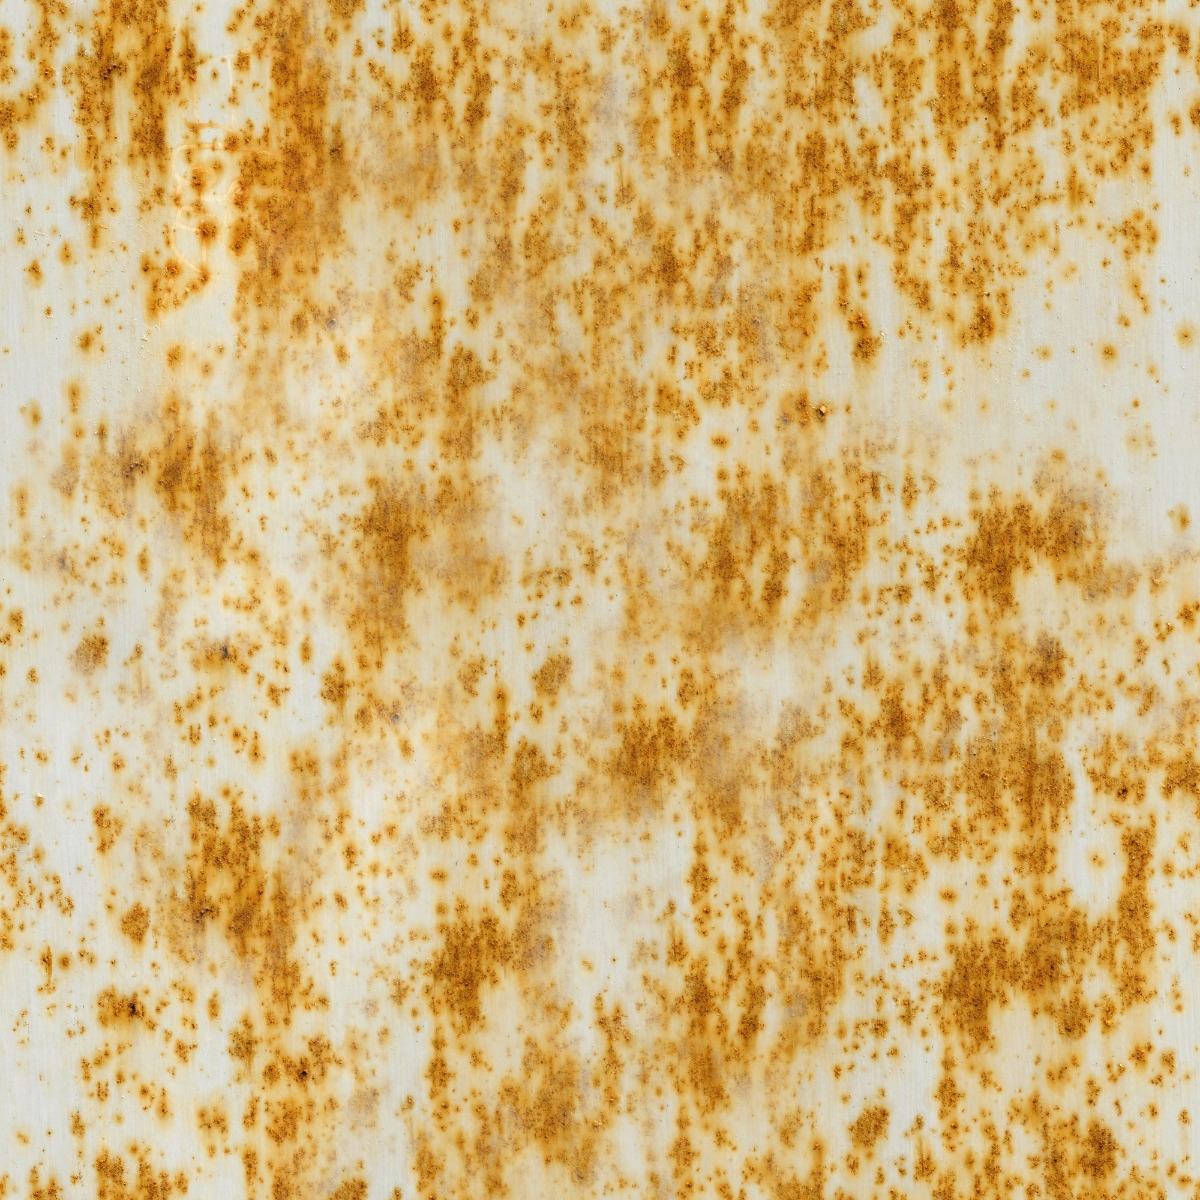 A seamless metal texture with rusting painted steel sheets arranged in a None pattern